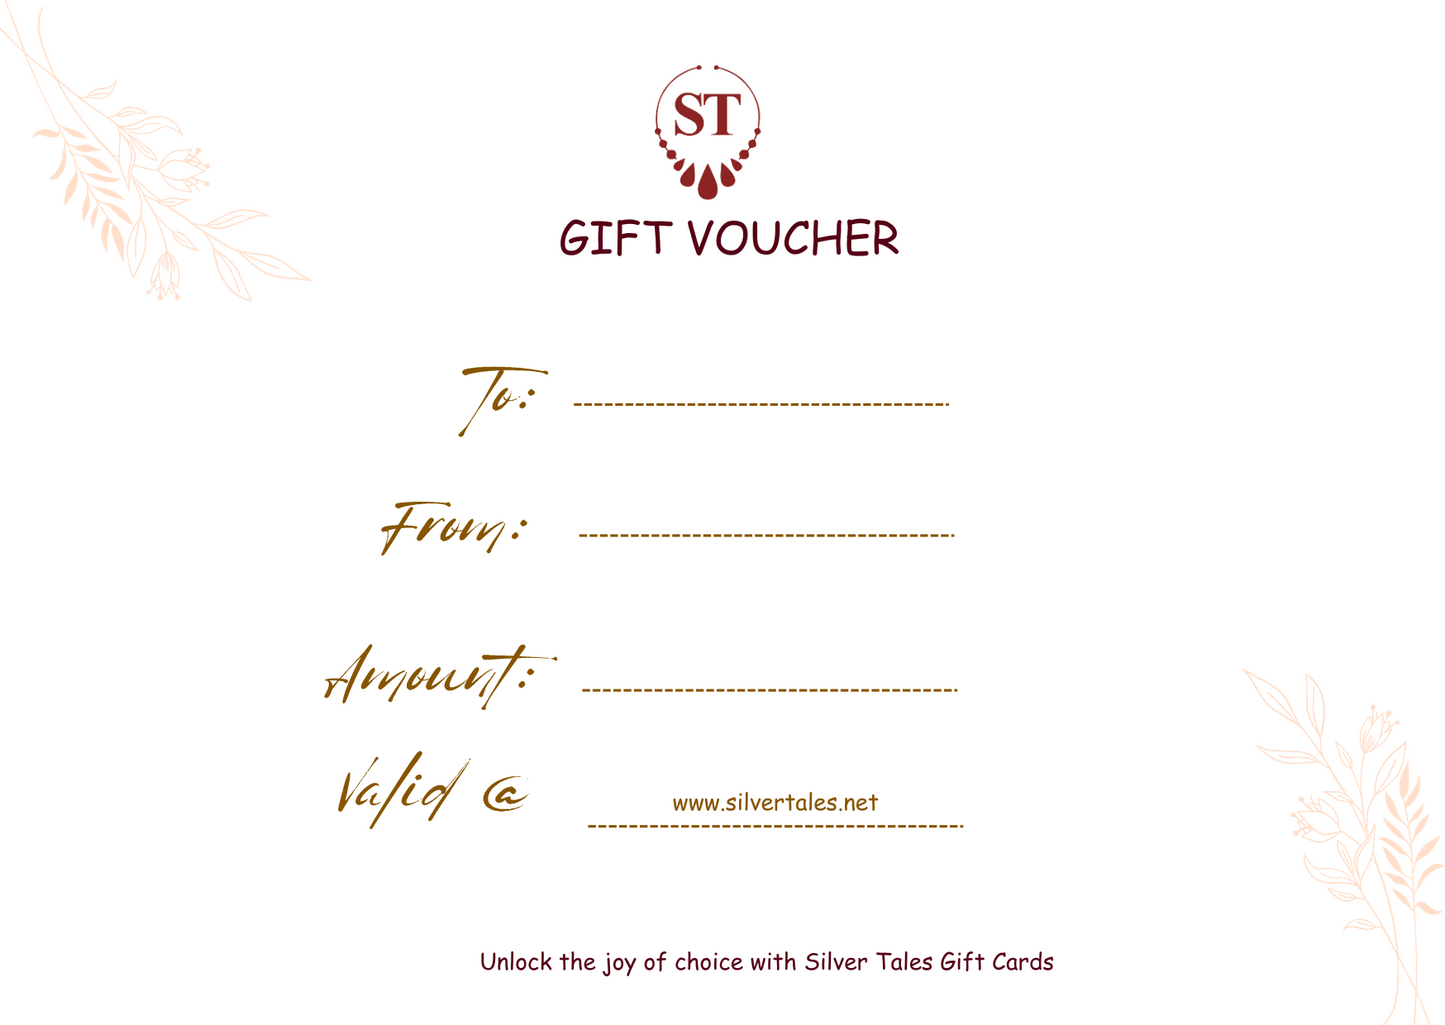 Silver Tales Gift Voucher